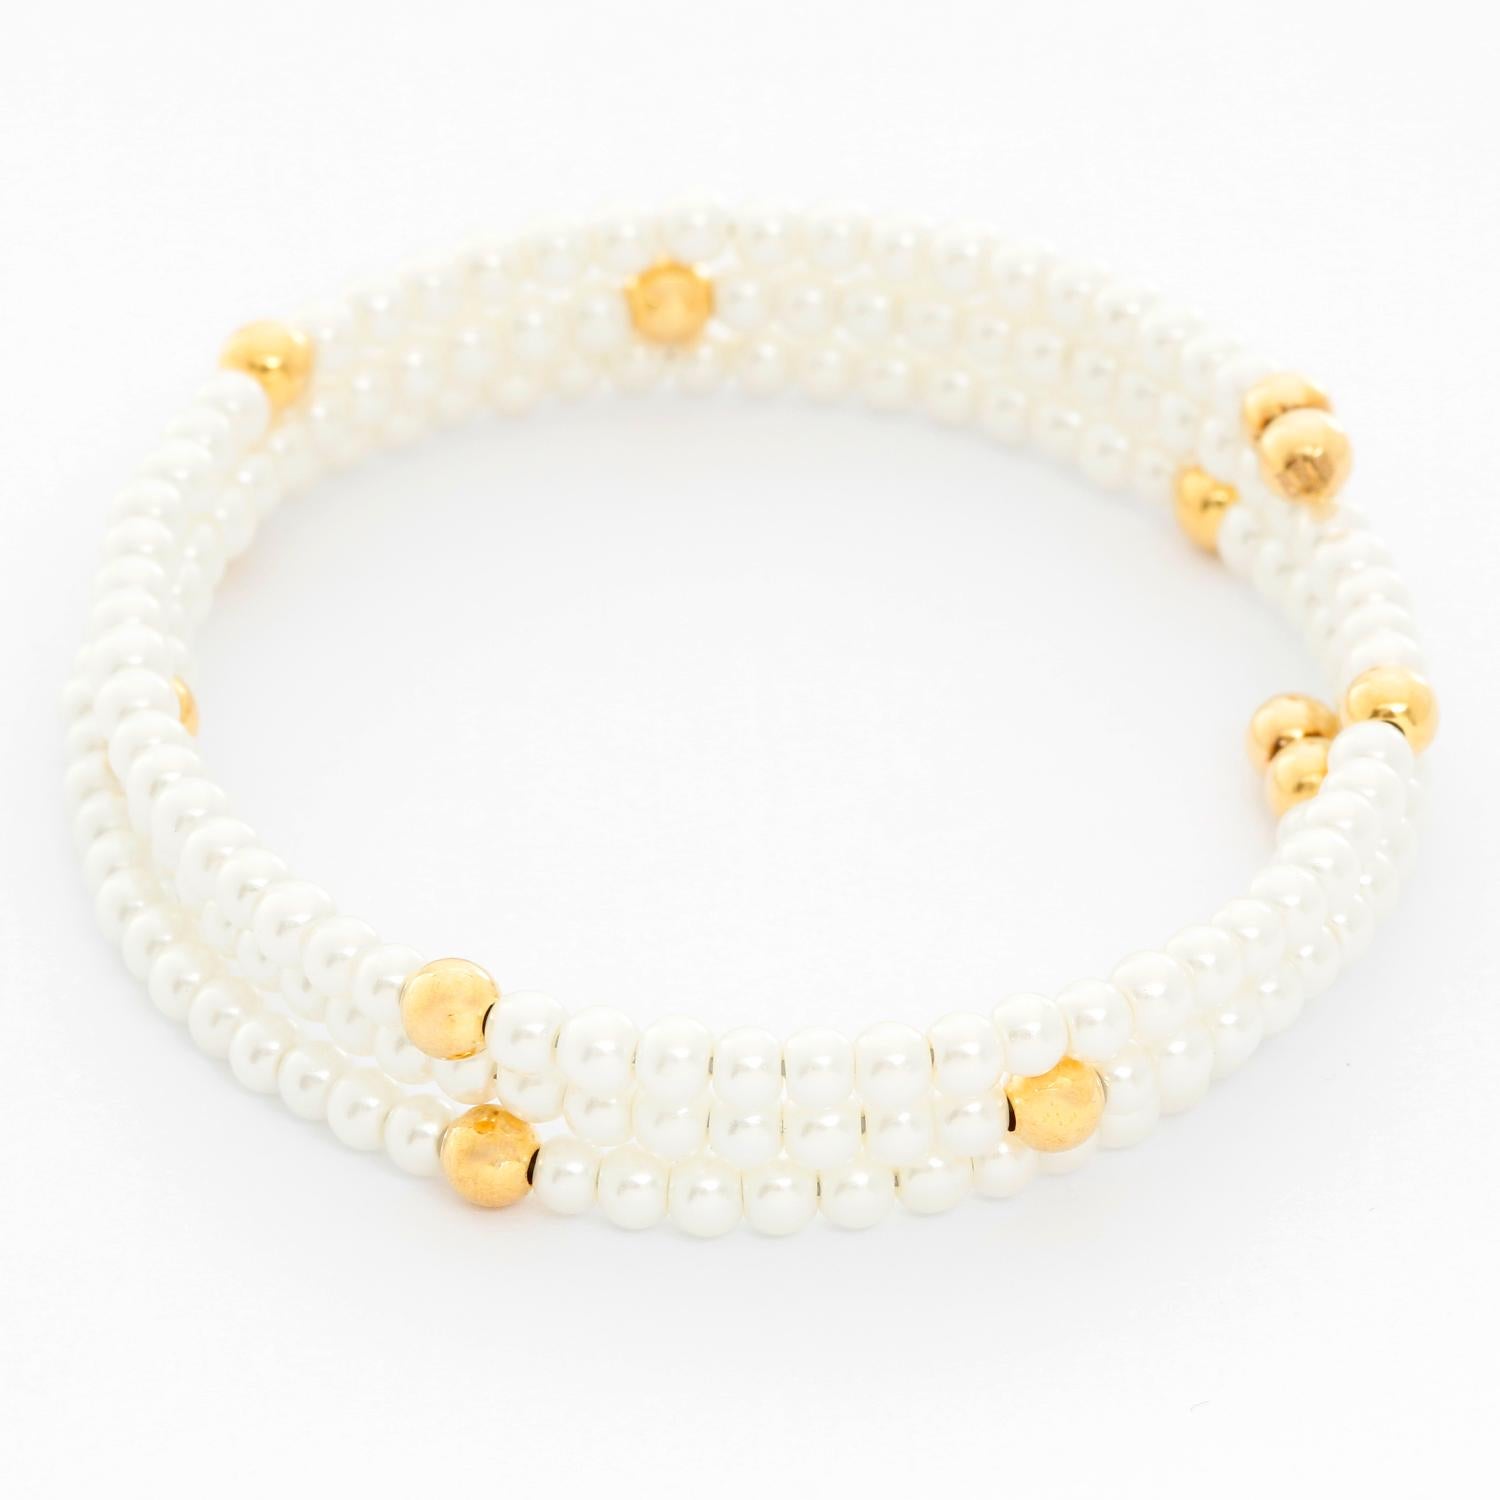 White Pearl Glass Bead Bracelet - Gorgeous wrap cuff bracelet with 3 strands of 3mm white pearls and 4mm gold accent beads. Bracelet measures 6.5 inches but offers stretch for larger wrists. New with DeMesy box.